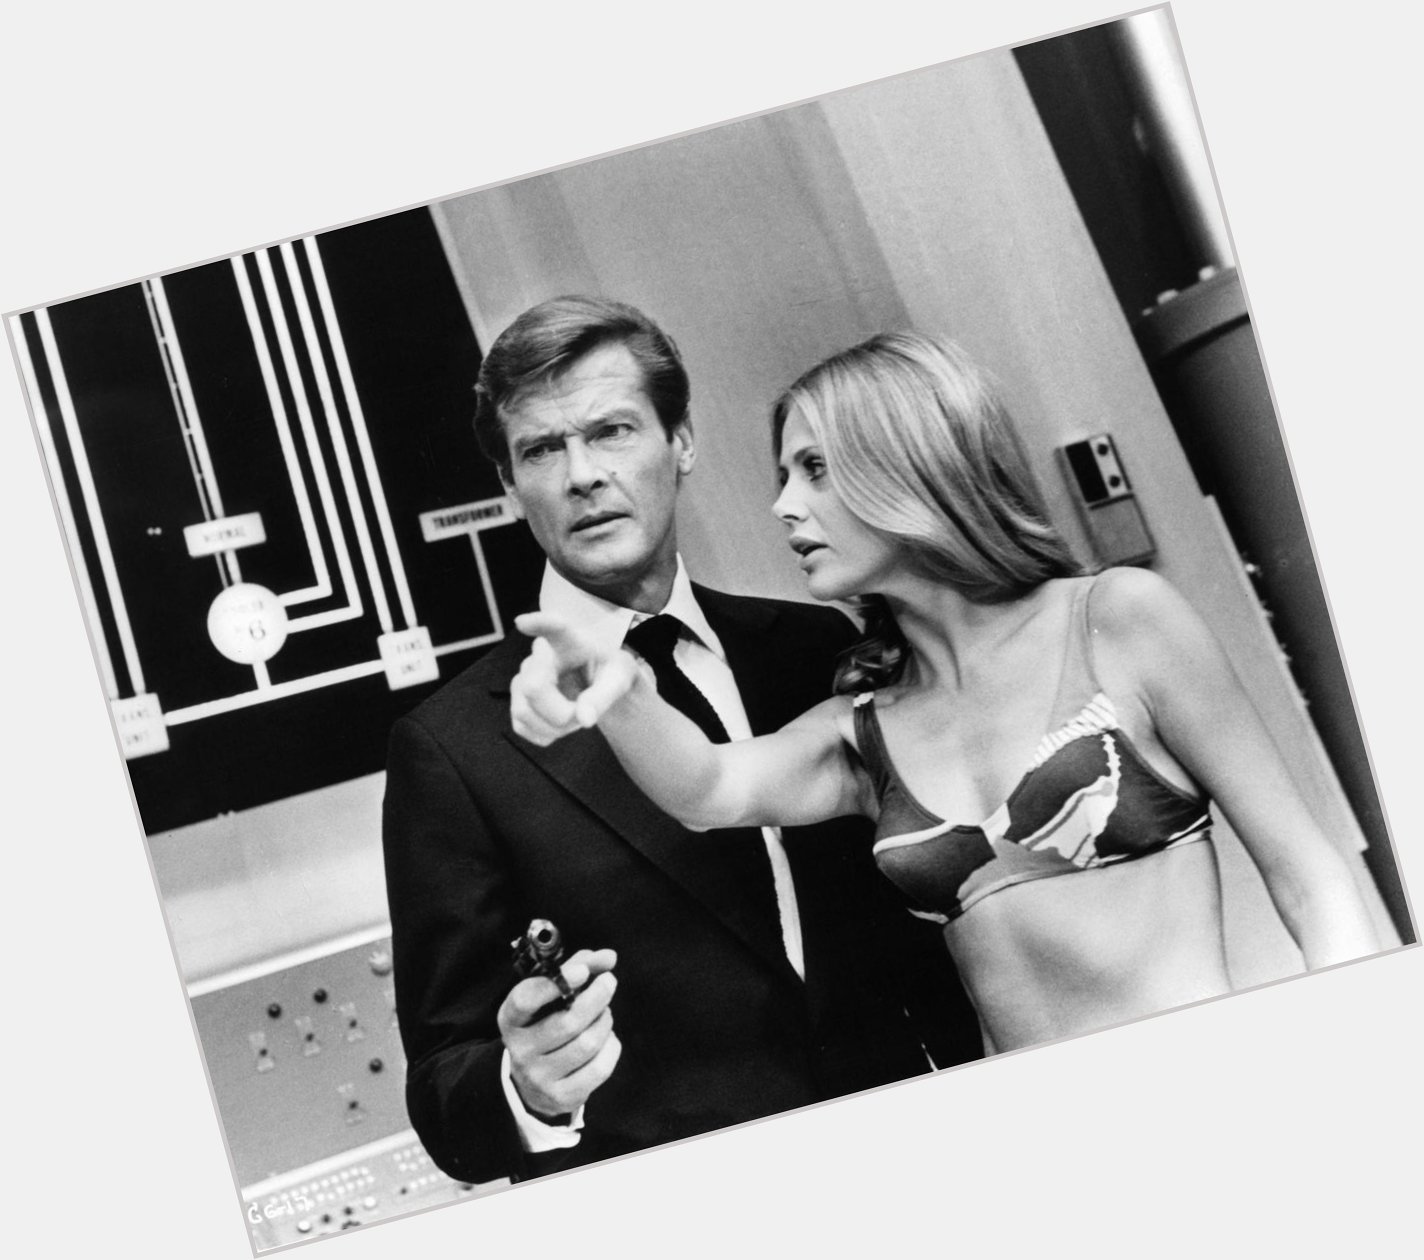 \" Roger Moore and Britt Ekland in THE MAN WITH THE GOLDEN GUN    1974.  Happy birthday Mr. Moore. 